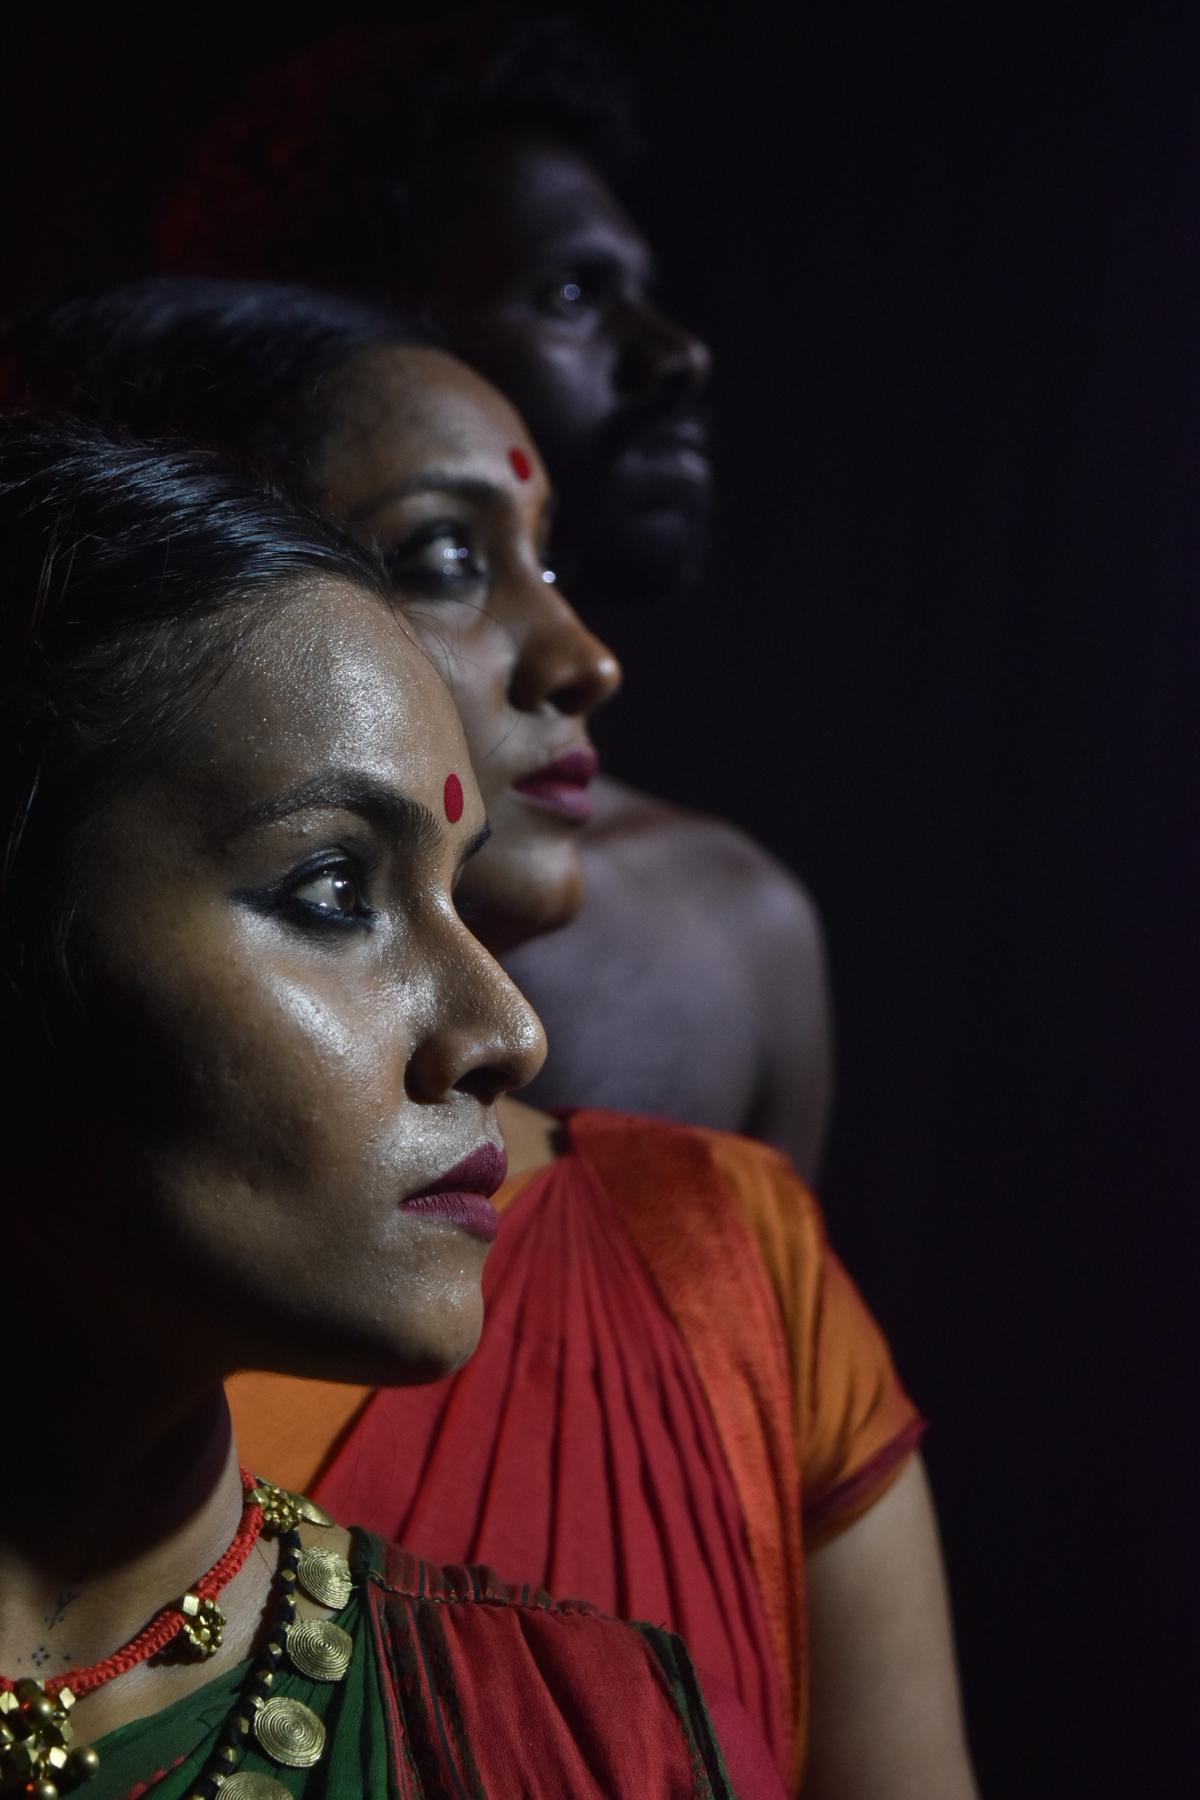 Dance-theatre production ‘Otta-Nilanilppinte Prathishedham’ discusses the resilience of the oppressed through characters from the Mahabharata